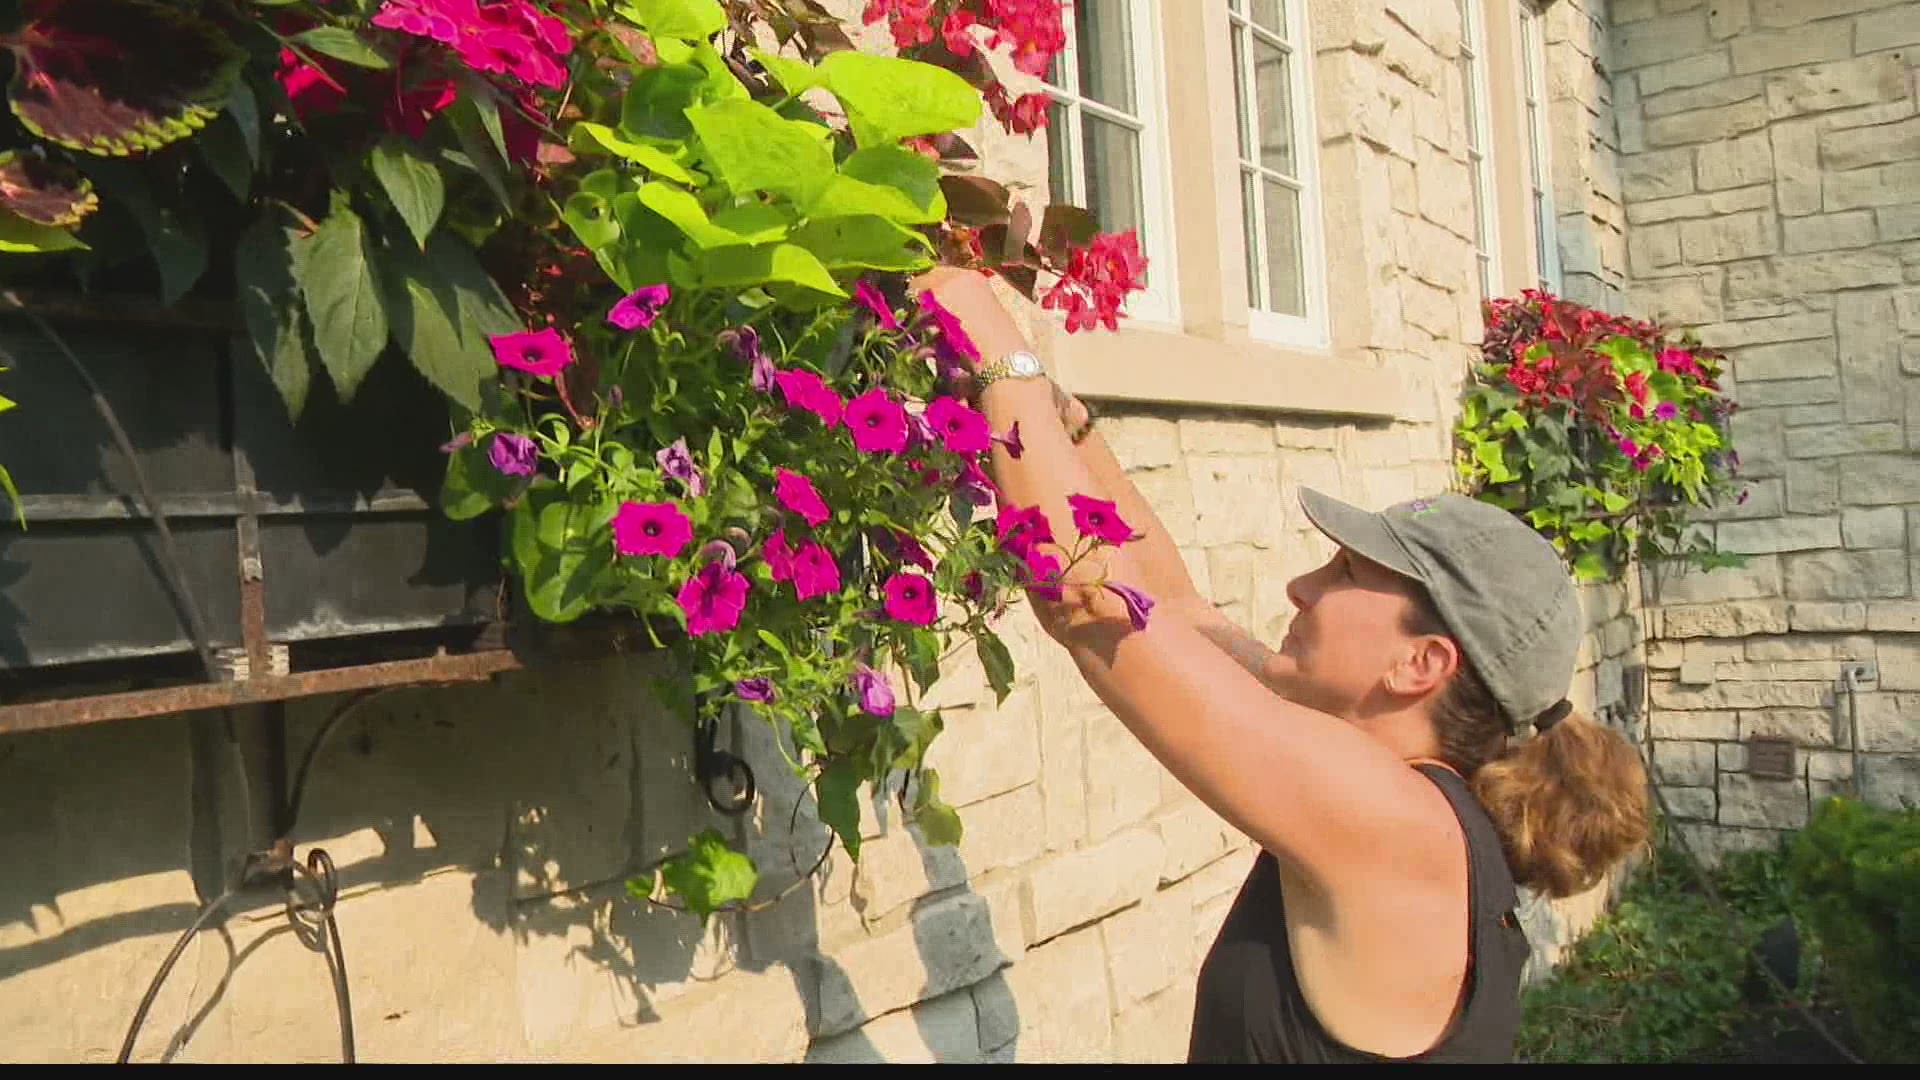 As some businesses struggled during the pandemic, Starnes and Jacobs saw their flower business flourish.